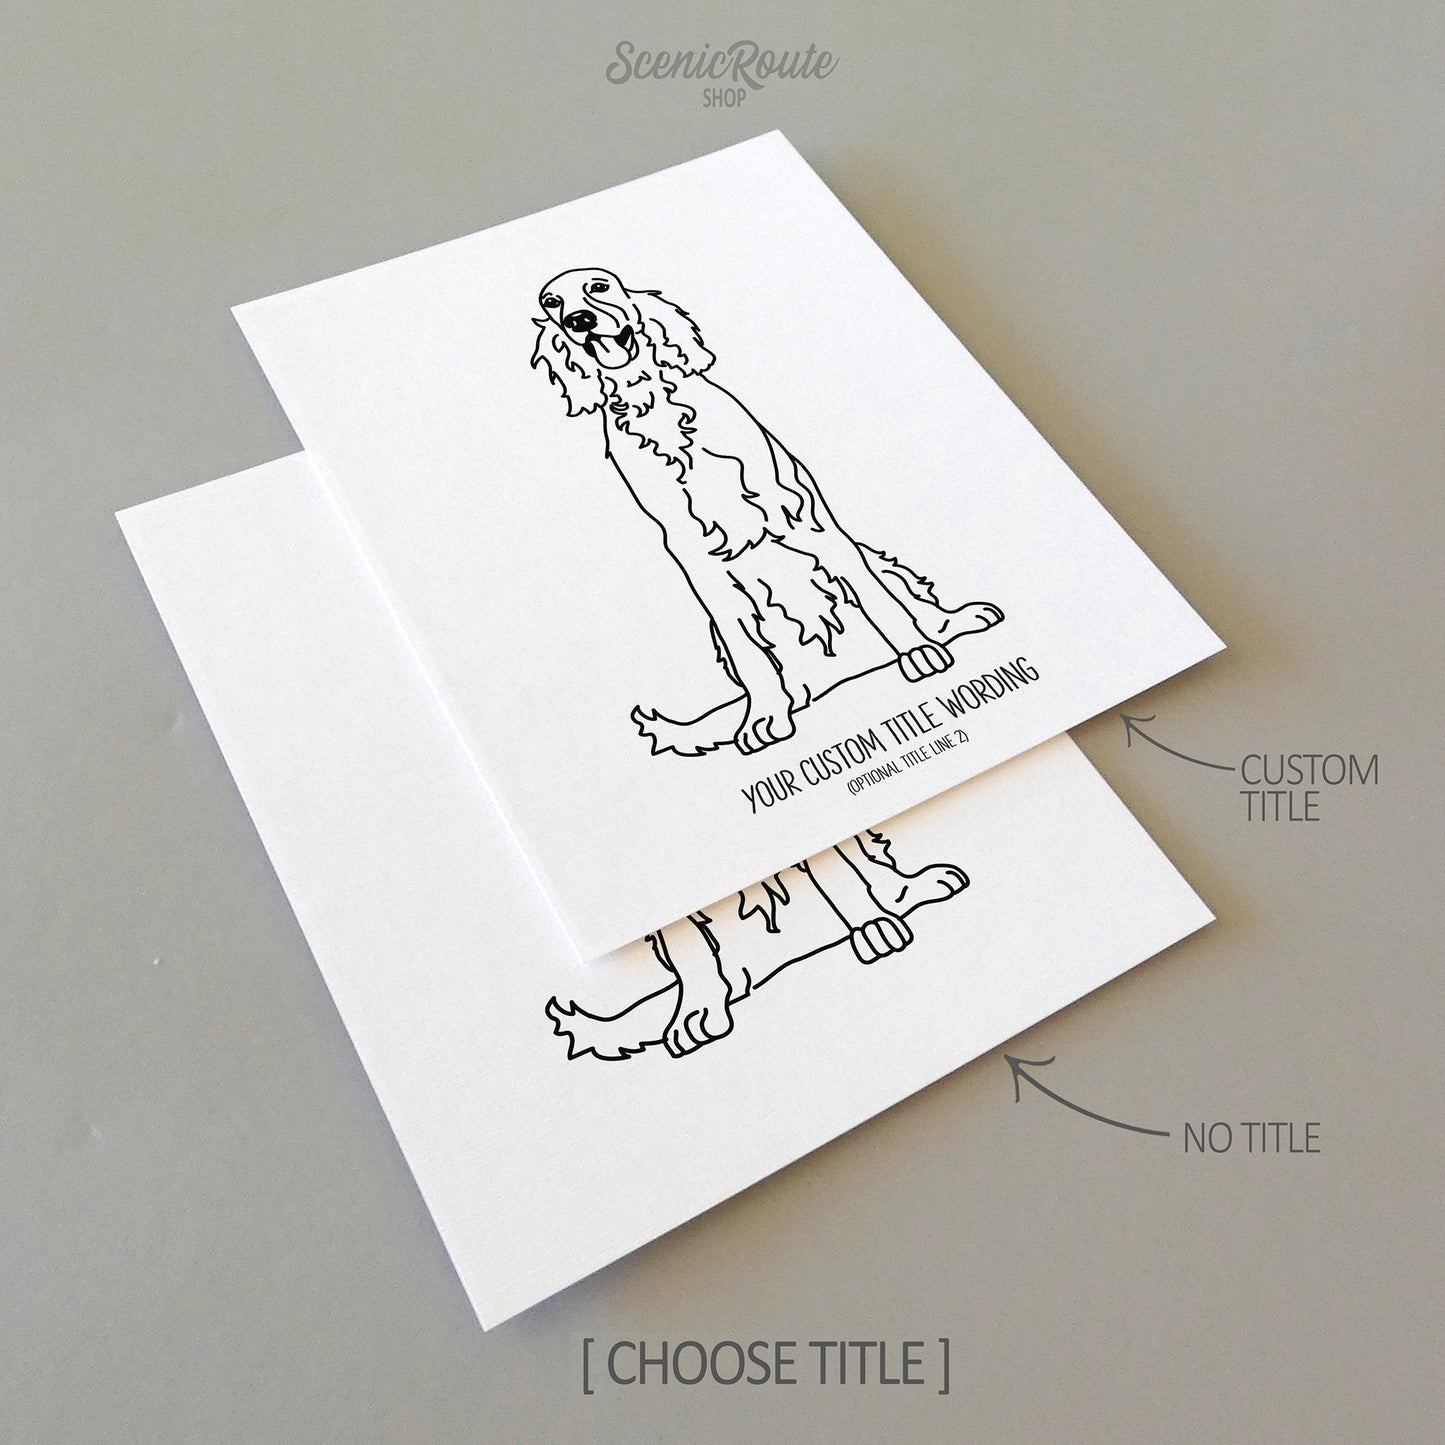 Two line art drawings of an Irish Setter dog on white linen paper with a gray background.  The pieces are shown with “No Title” and “Custom Title” options for the available art print options.